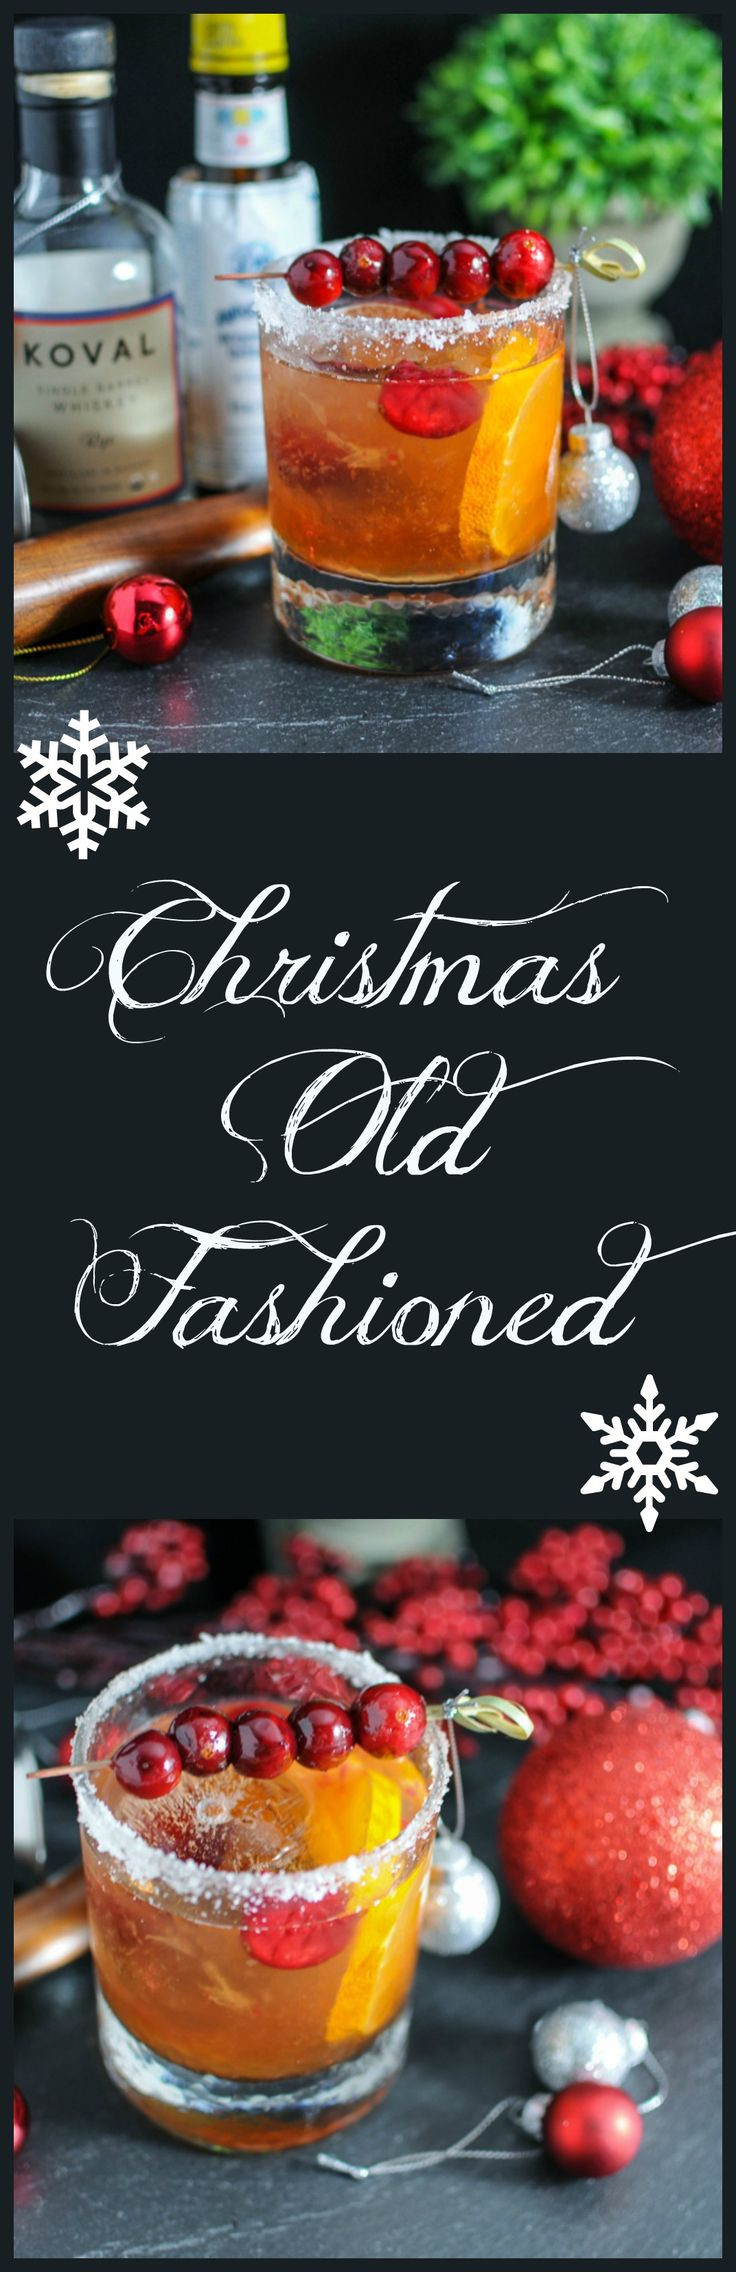 Whiskey Christmas Drinks
 1000 ideas about Old Fashioned Kitchen on Pinterest